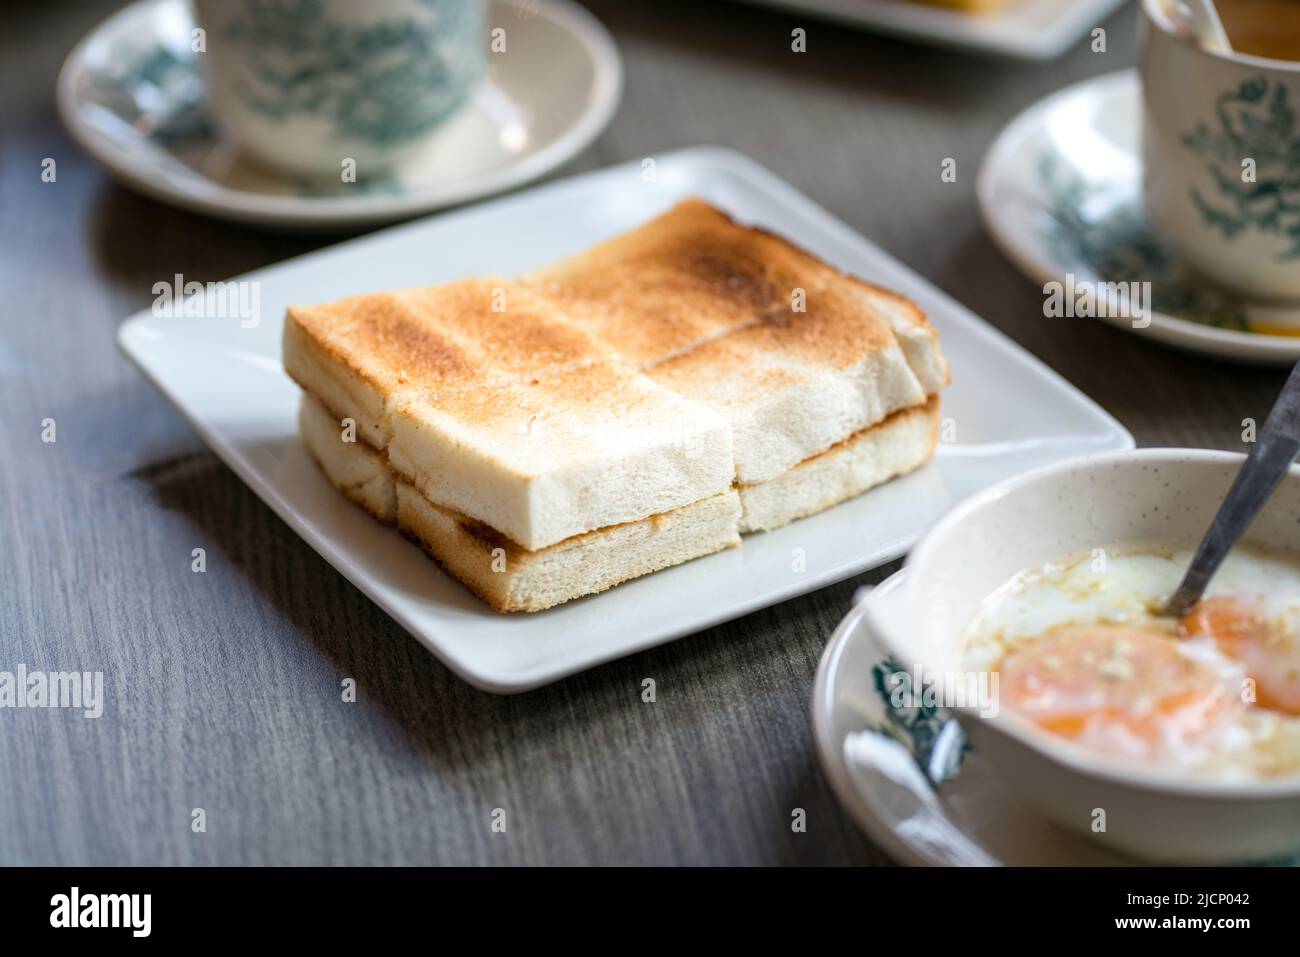 Oriental traditional Hainanese breakfast set with toast bread, half boiled eggs and coffee. Stock Photo